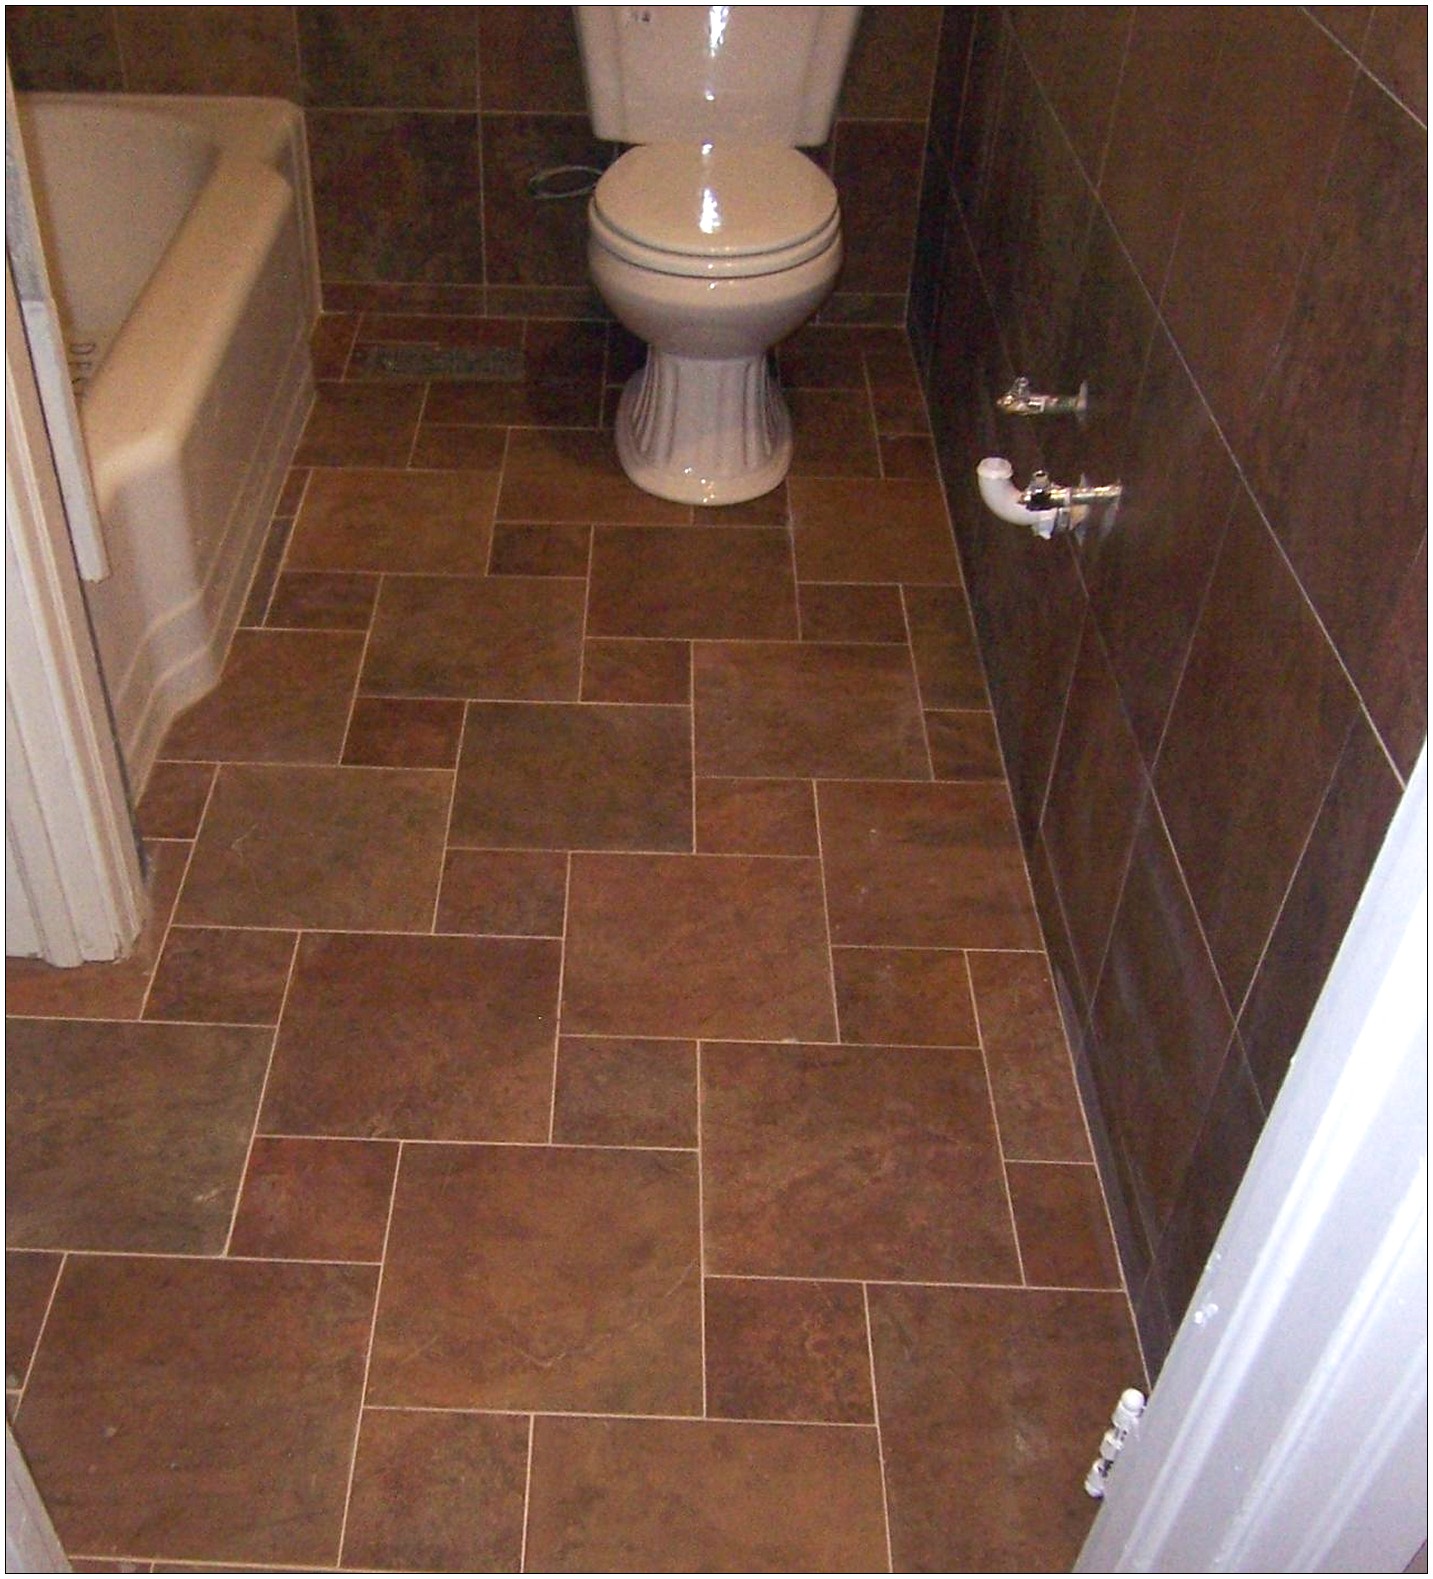 What are some examples of modern bathroom tiles?